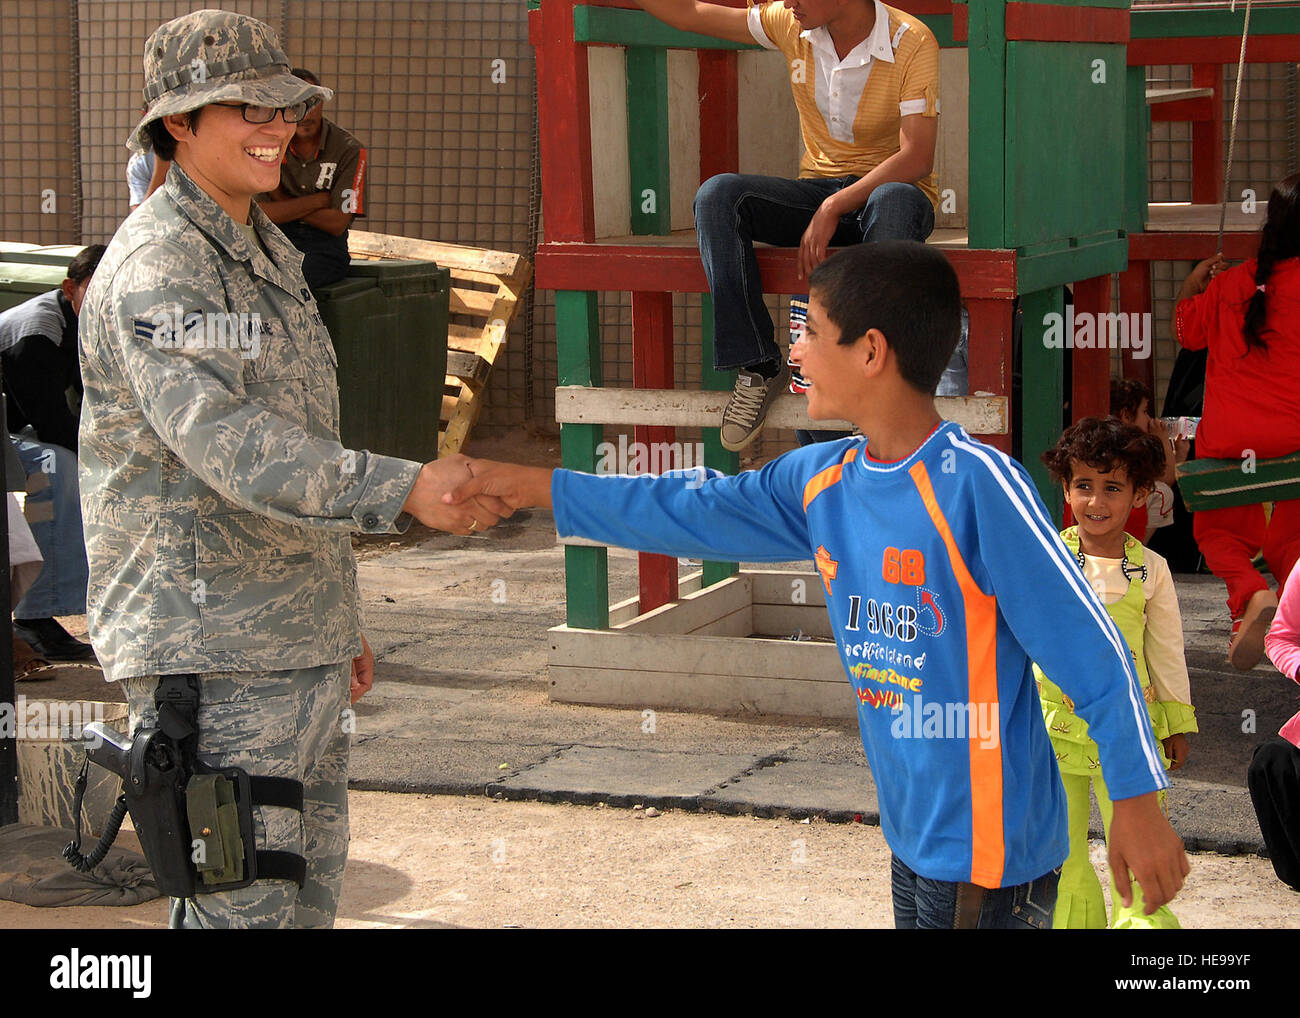 Camp Bucca, Iraq -- Airman 1st Class Martina Malone, a Security Forces member assigned to the 887th Expeditionary Security Forces Squadron, receives a handshake from an Iraqi boy waiting to visit his father at the Theater Internment Facility (TIF) at Camp Bucca, Iraq, on Sept. 29. The 887th ESFS controls access to prisoners at the TIF and processes visitation procedures for family members. The Air Force works side by side with Army Soldiers in manning the facility, which houses more than 18,000 inmates. Airman Malone is deployed from Dyess Air Force Base, Texas. Tech. Sgt. Raheem Moore) Stock Photo